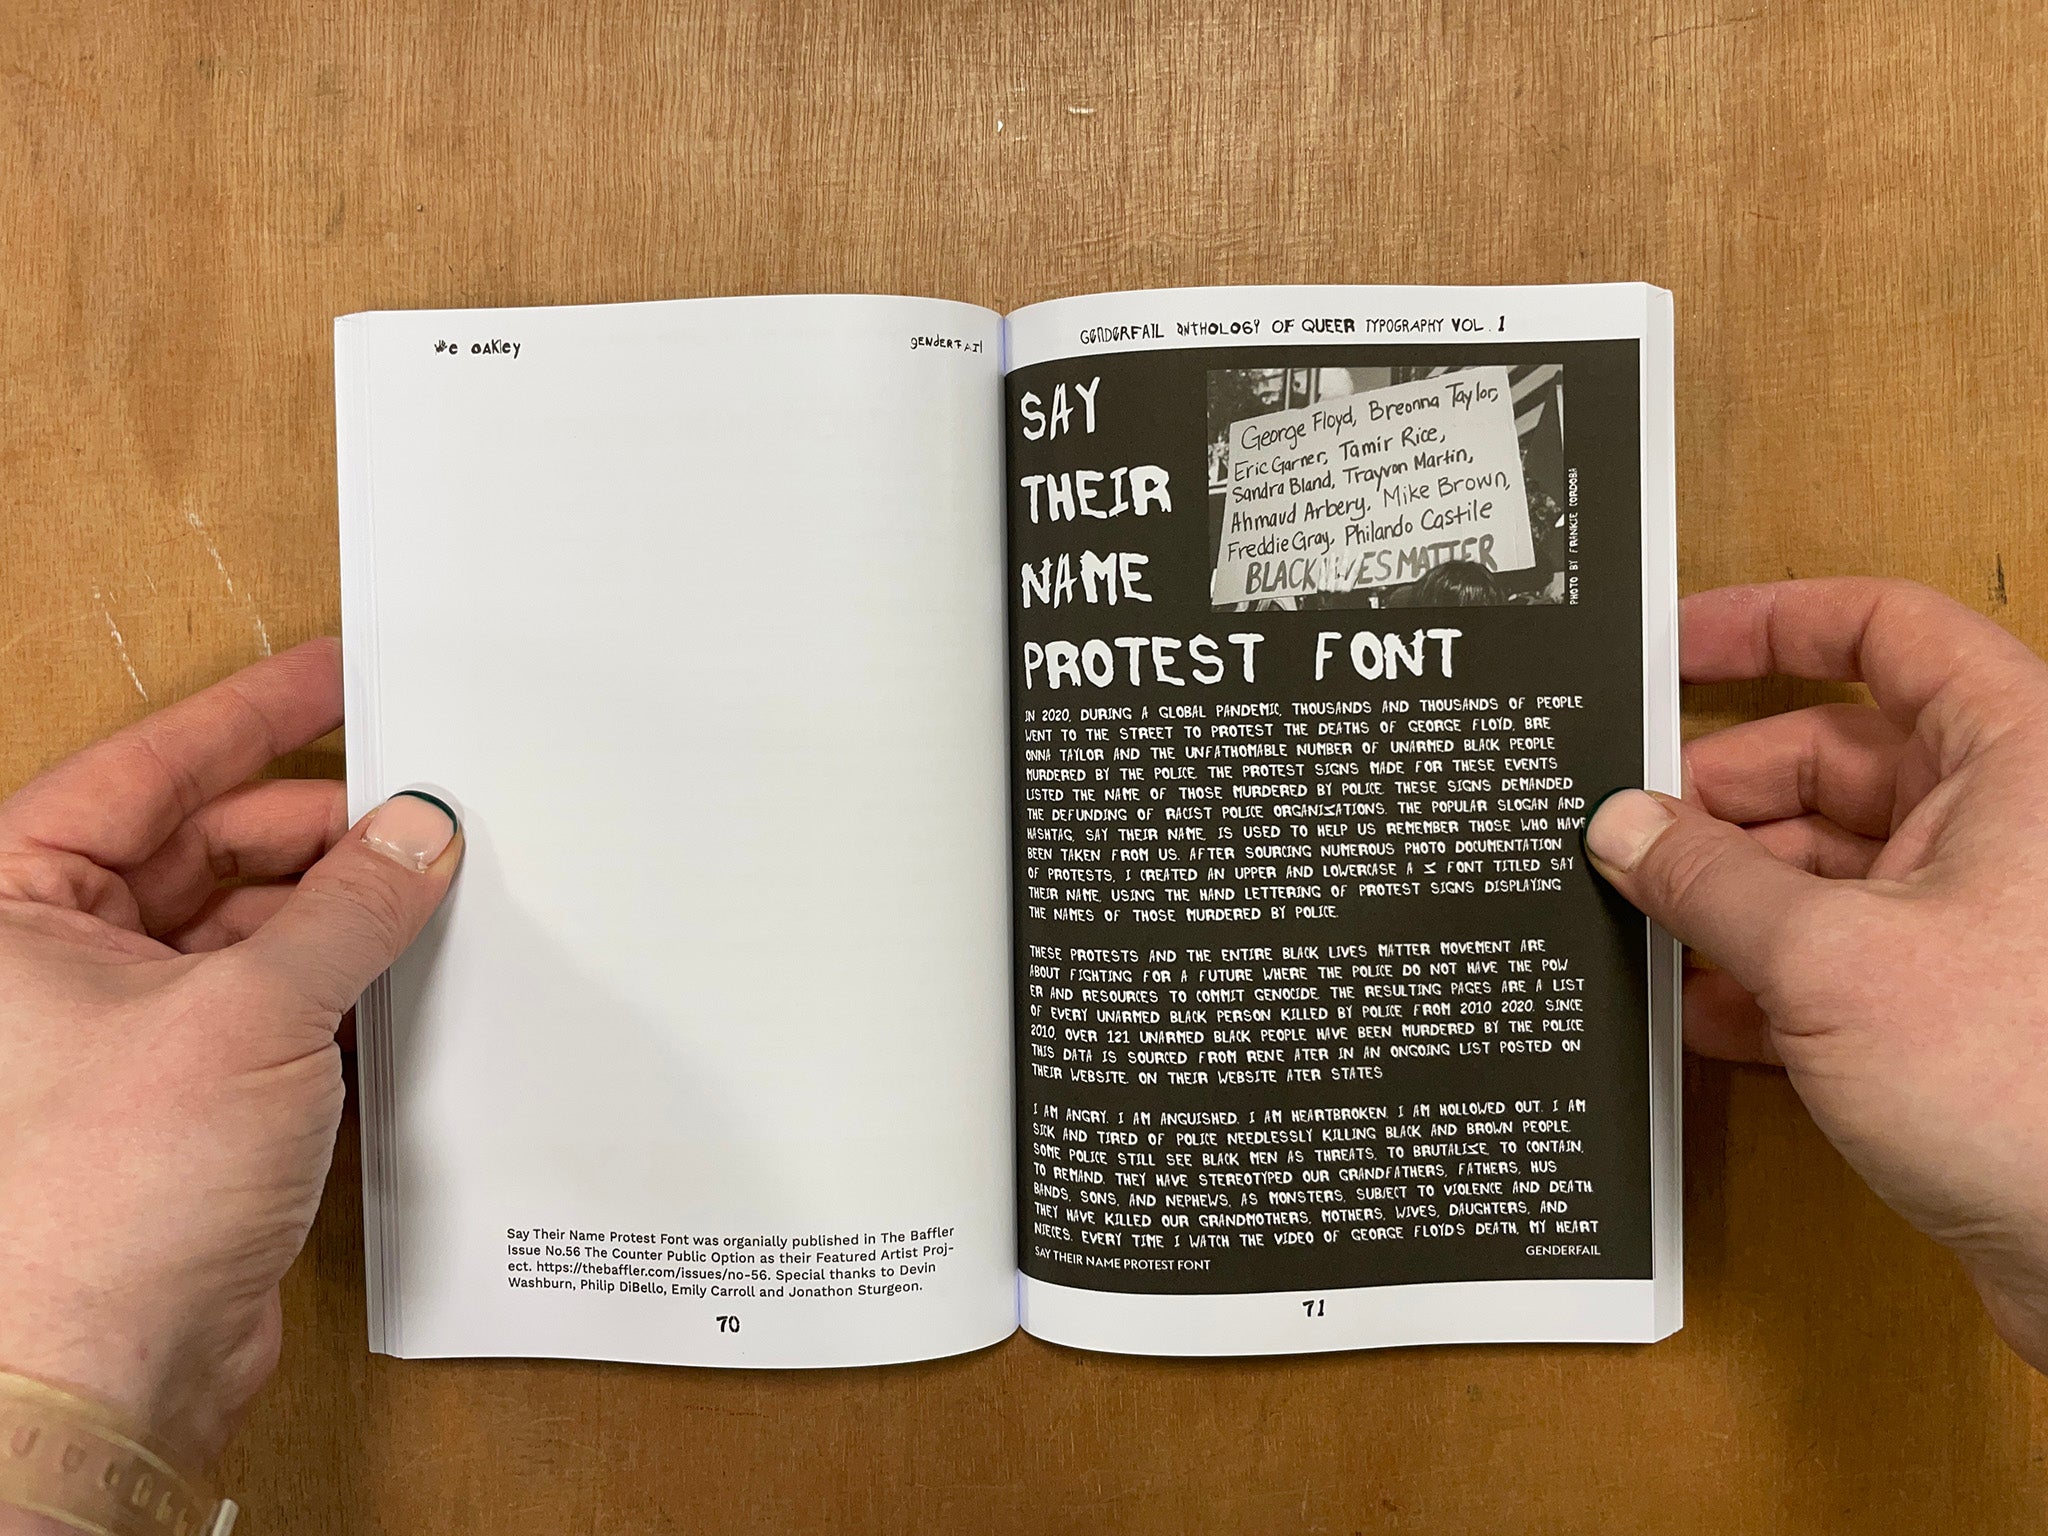 GENDERFAIL ANTHOLOGY OF QUEER TYPOGRAPHY VOL. 1 by Be Oakley with Paul Soulellis